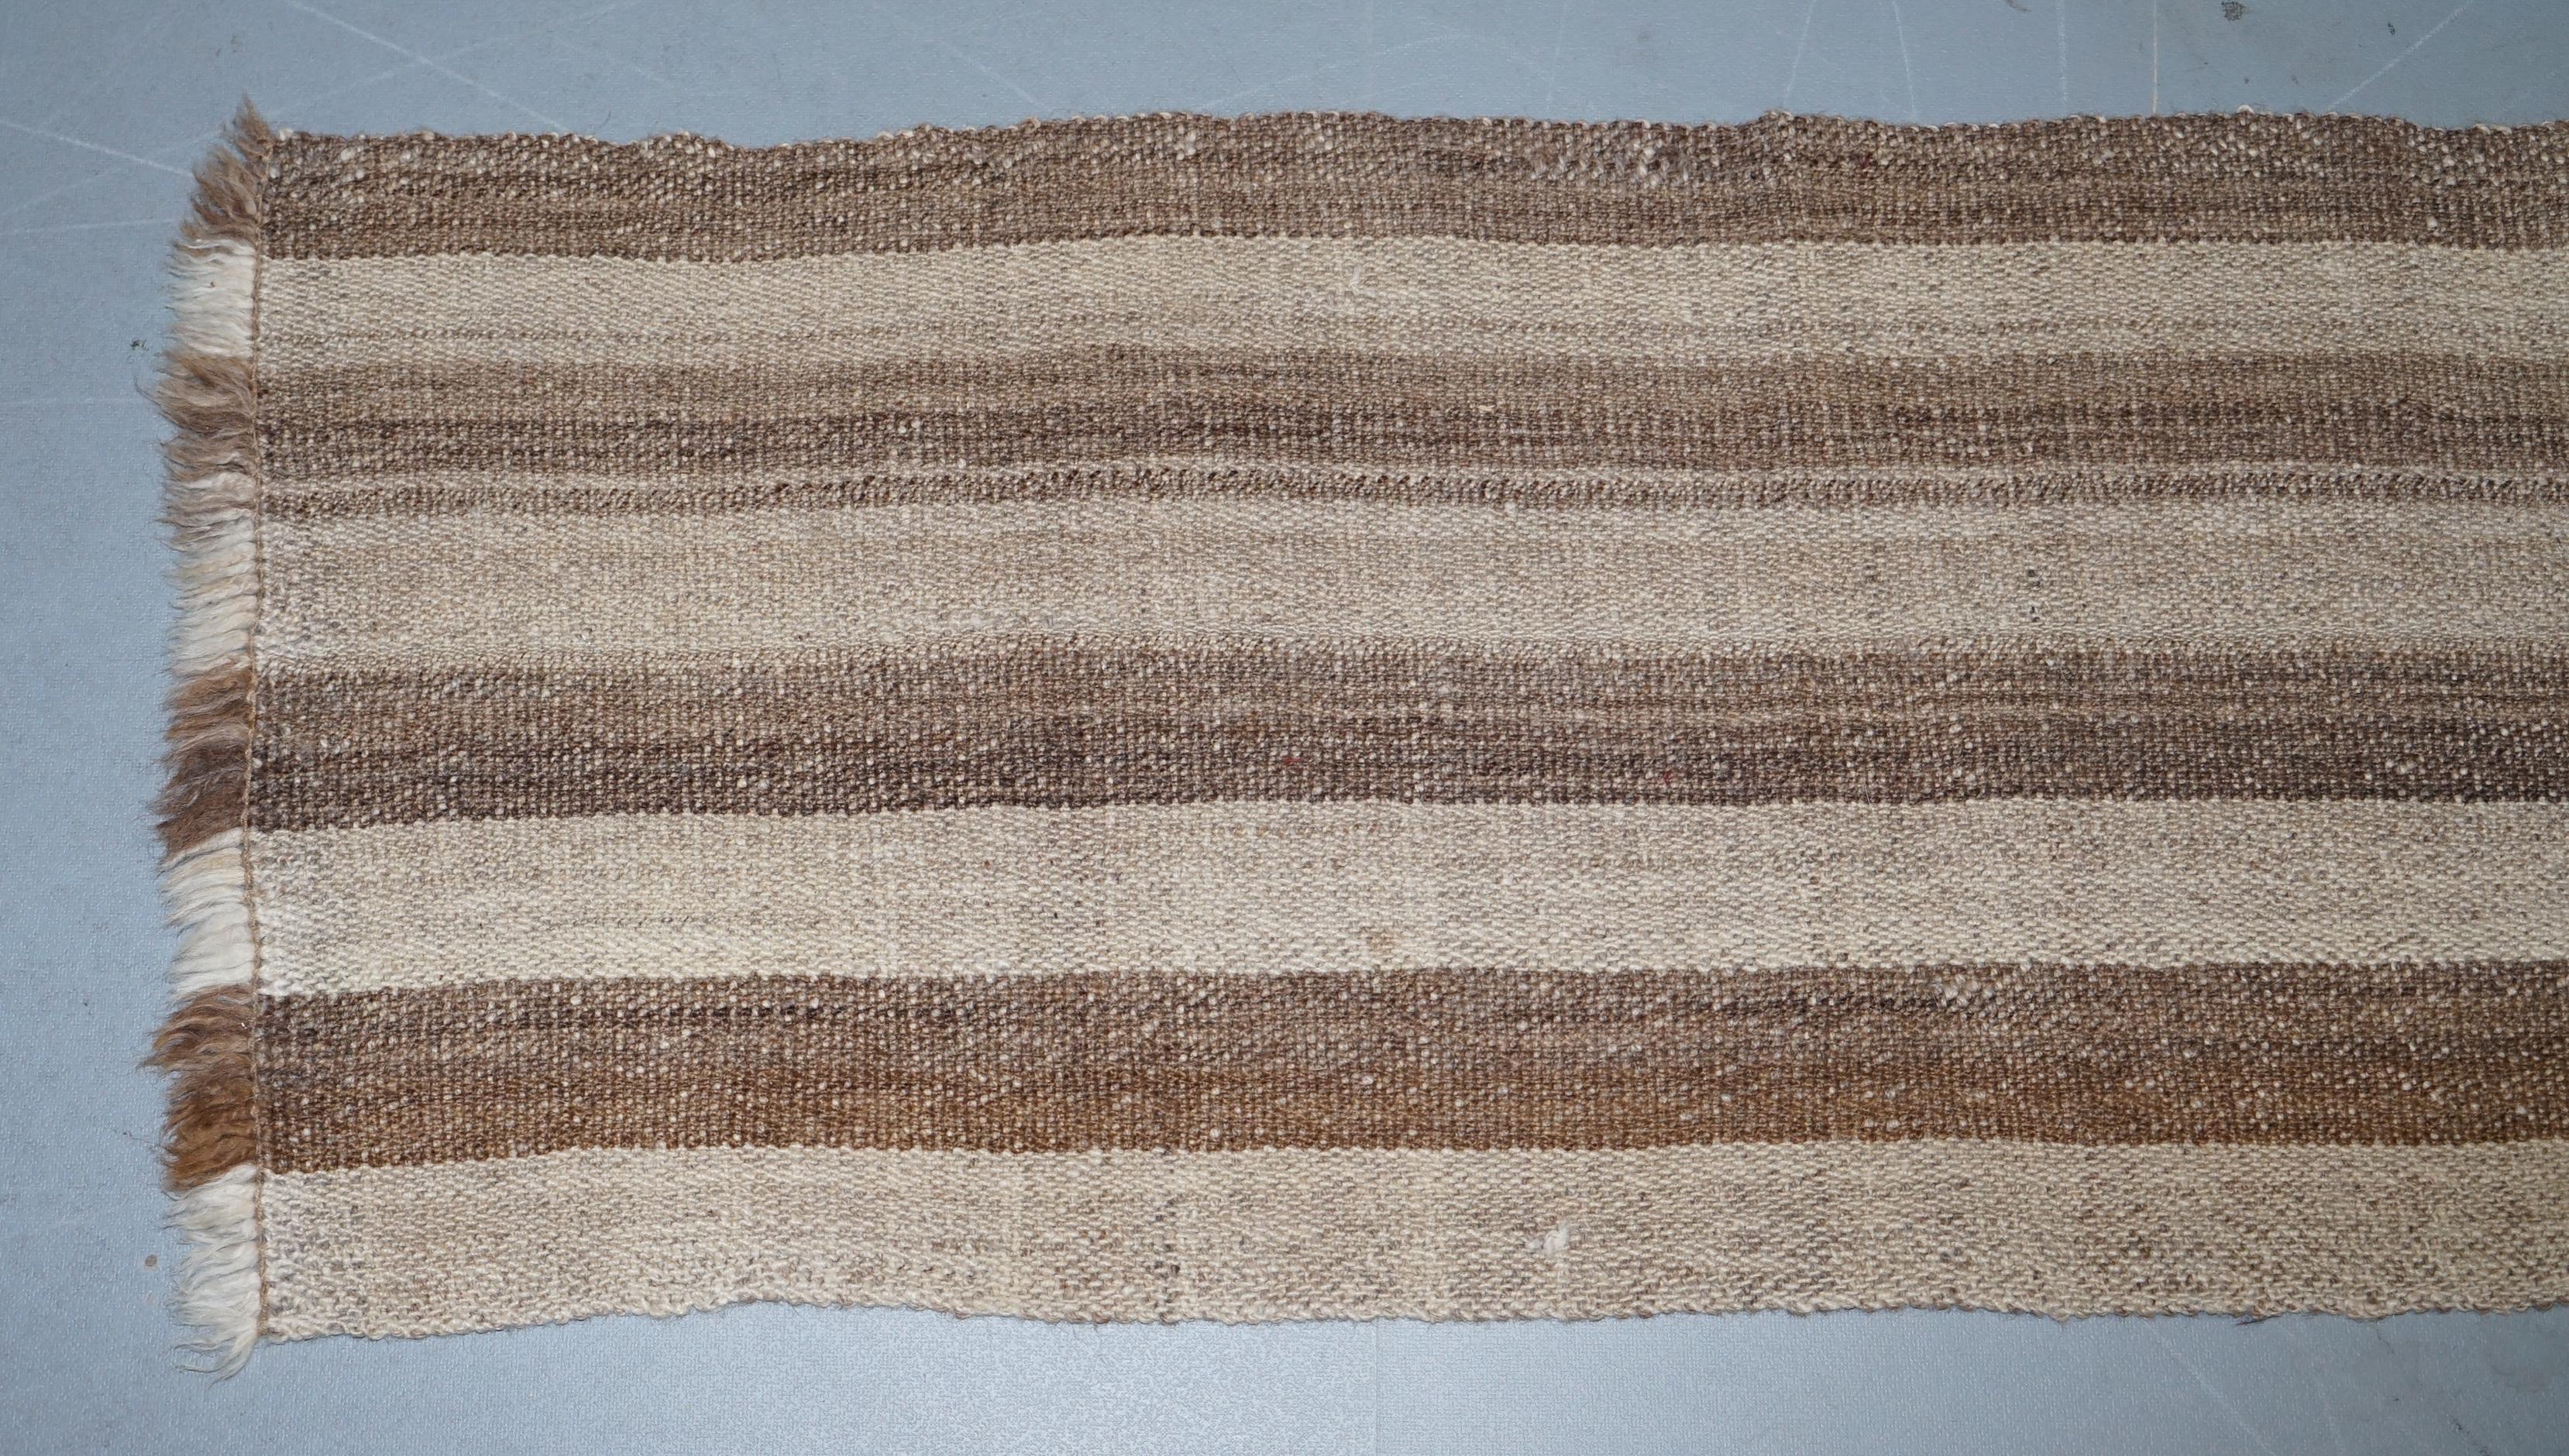 We are delighted to offer for sale this vintage striped kilim throw or wall hanging 

Rugs Rugs Rugs!!! I have a selection of lovely antique & vintage rugs and wall hangings, all listed under my other items 

Please checkout my other items for